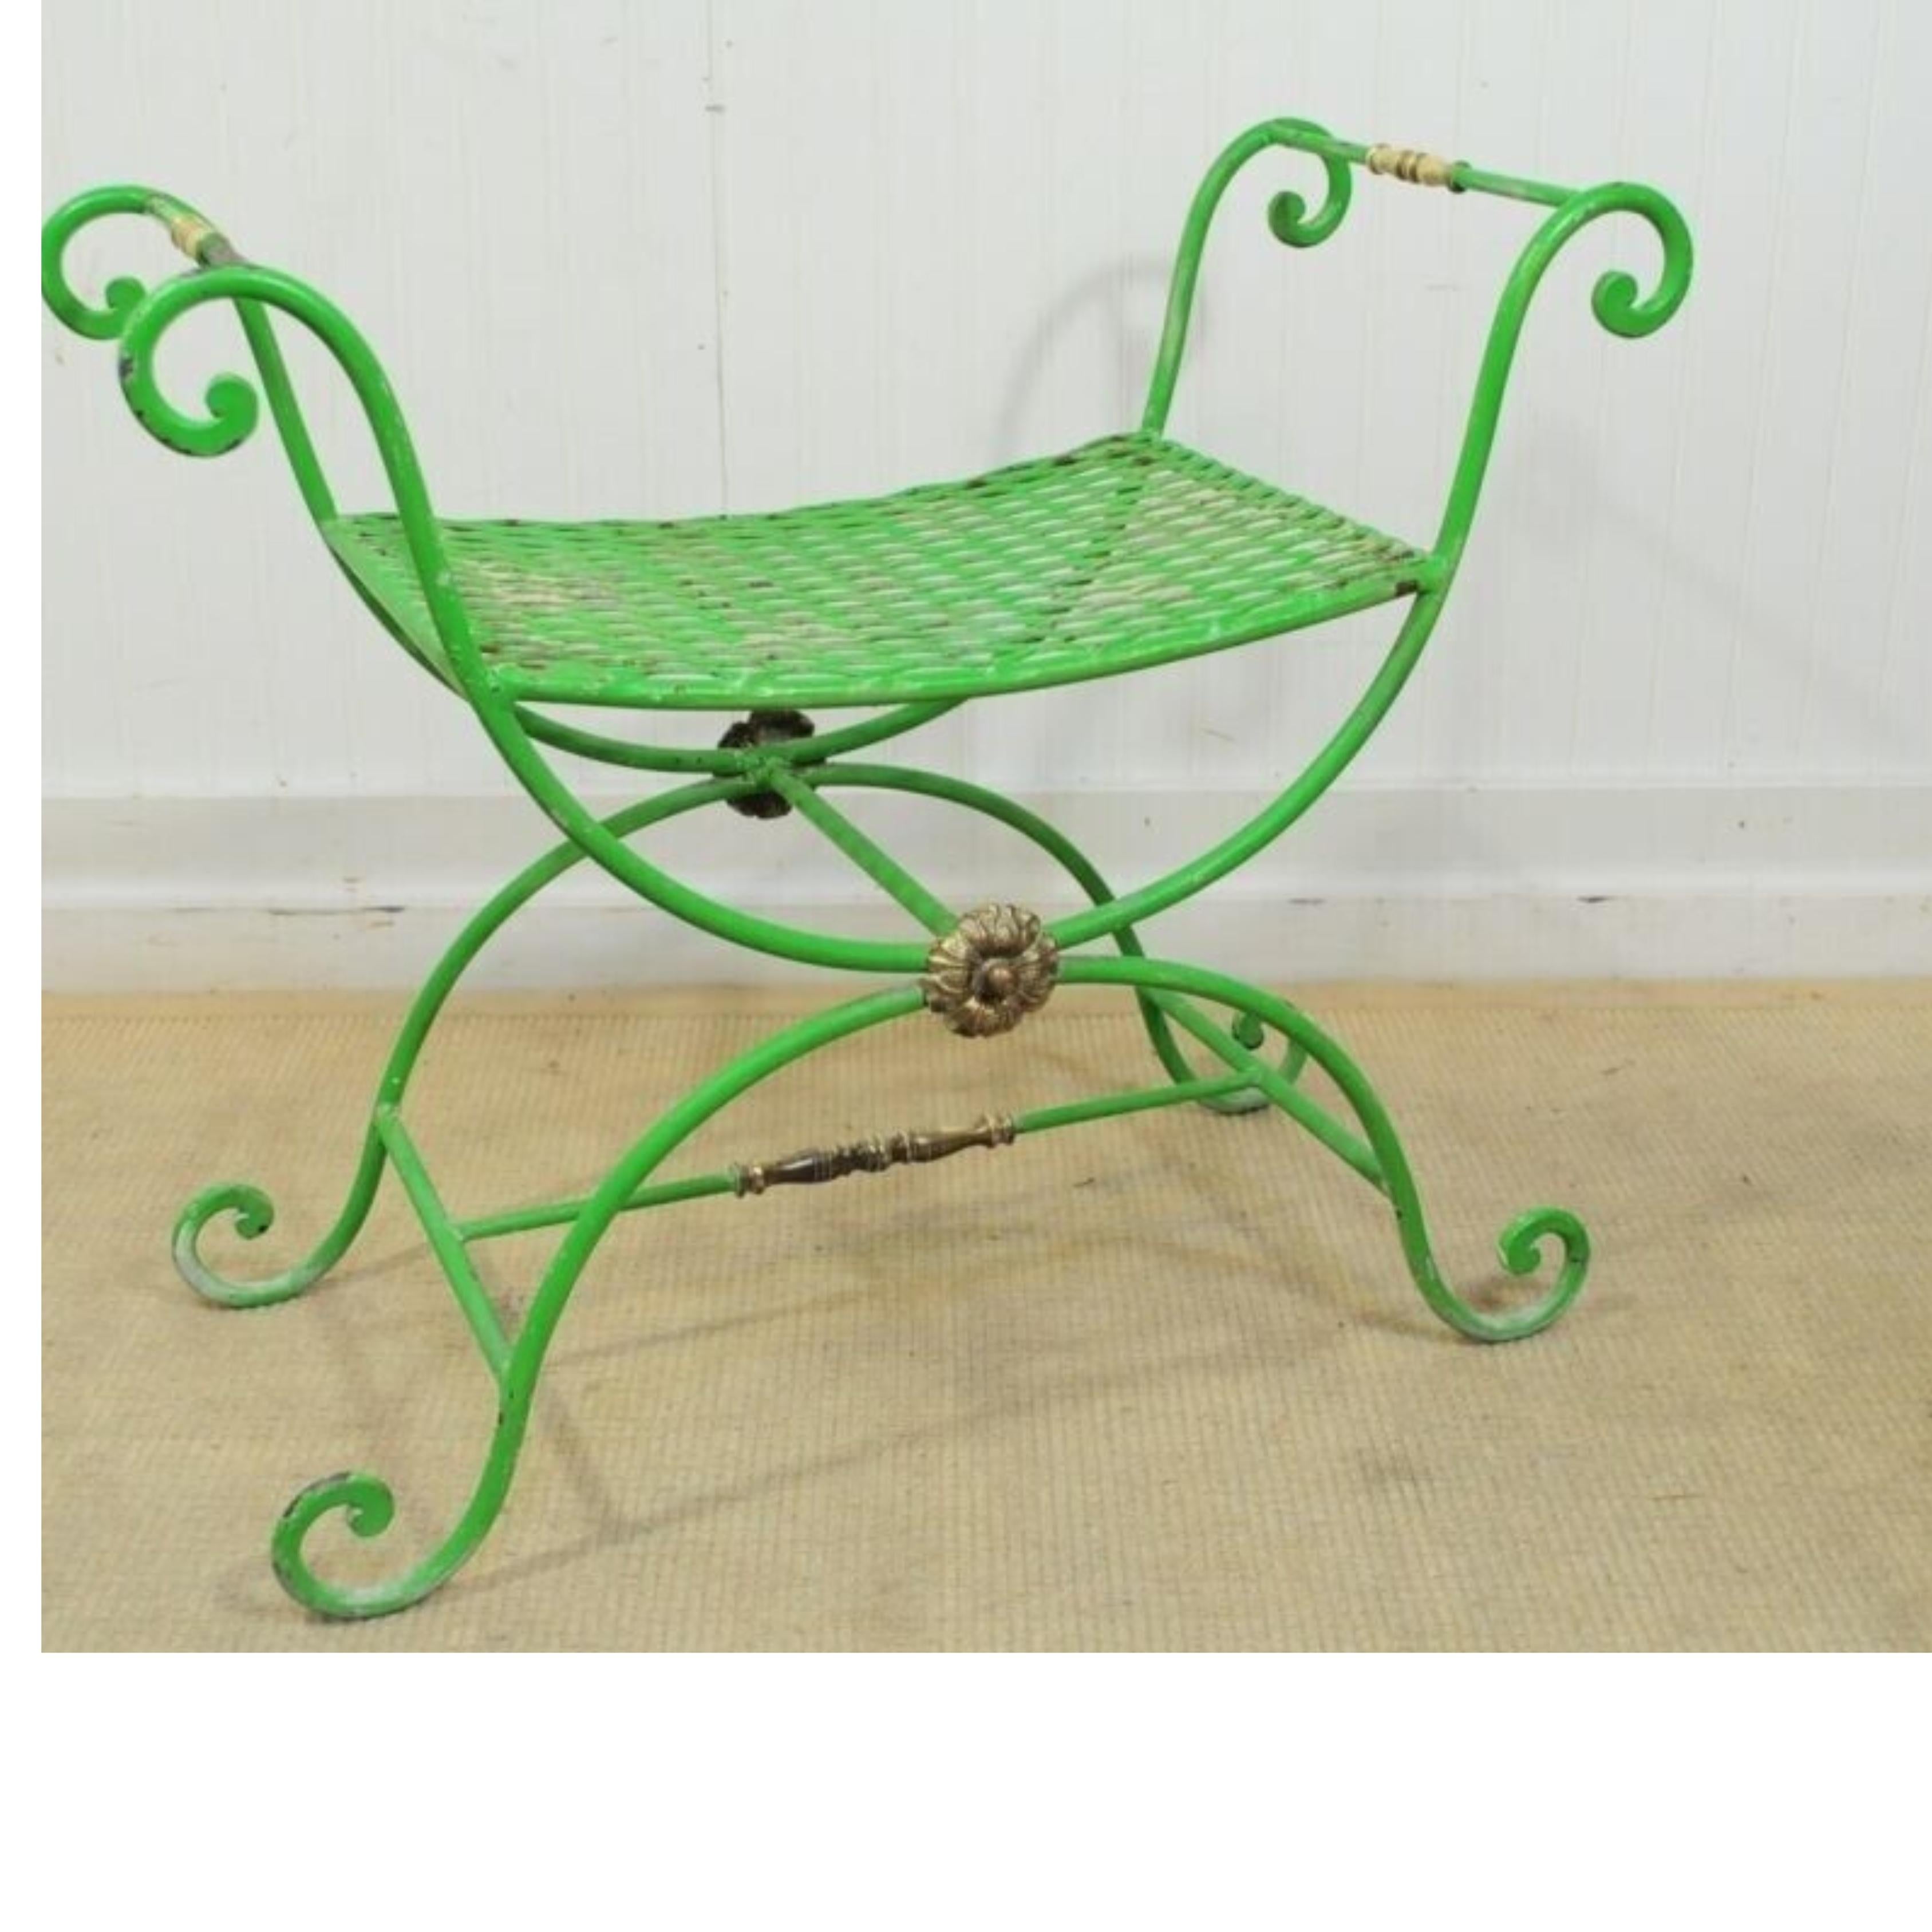 Vintage Neoclassical Style Green Painted Wrought Iron Brass Curule X Bench Stool. Item features distressed painted finish, wrought iron construction, brass accents. Circa Mid to Late 1900s. Measurements: 23